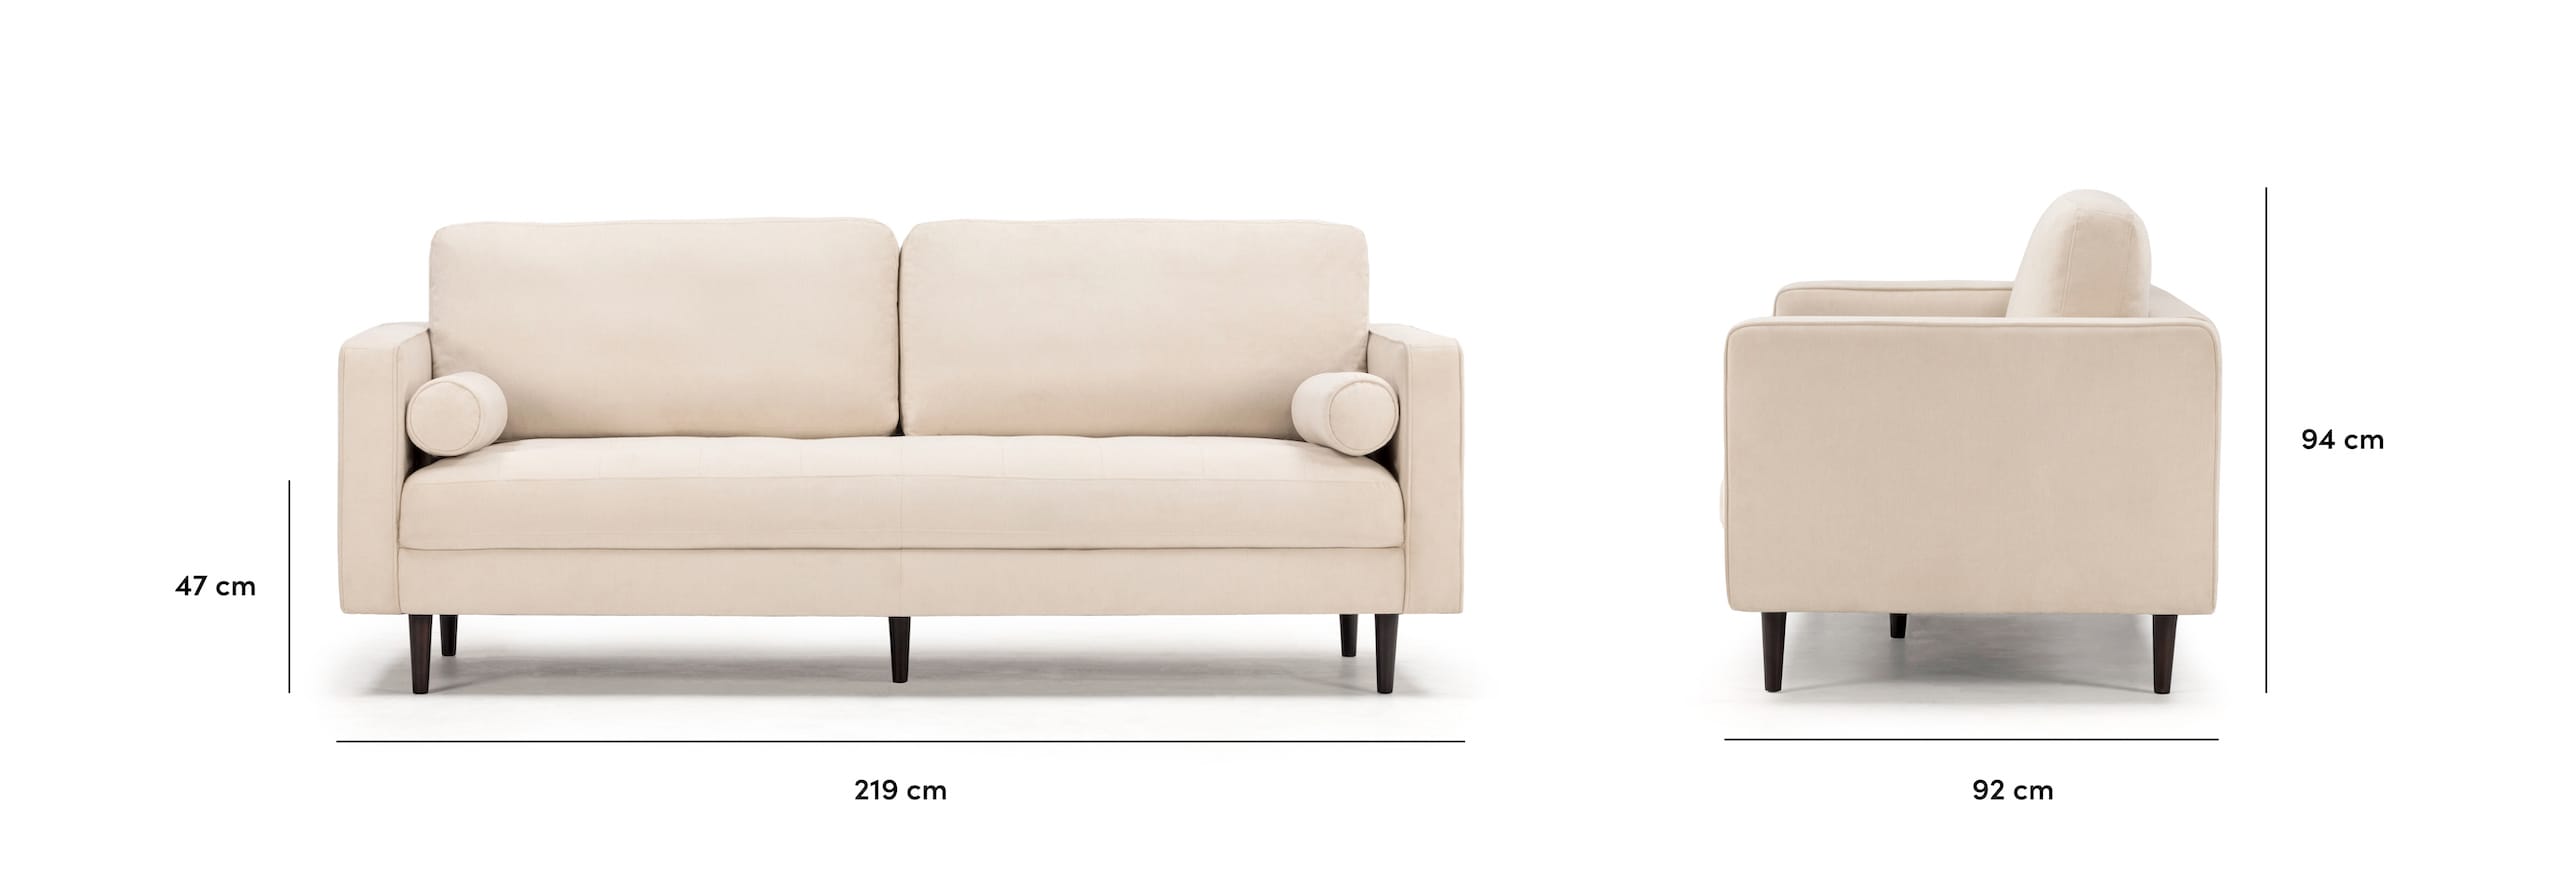 Soho sofa in ivory with dimensions